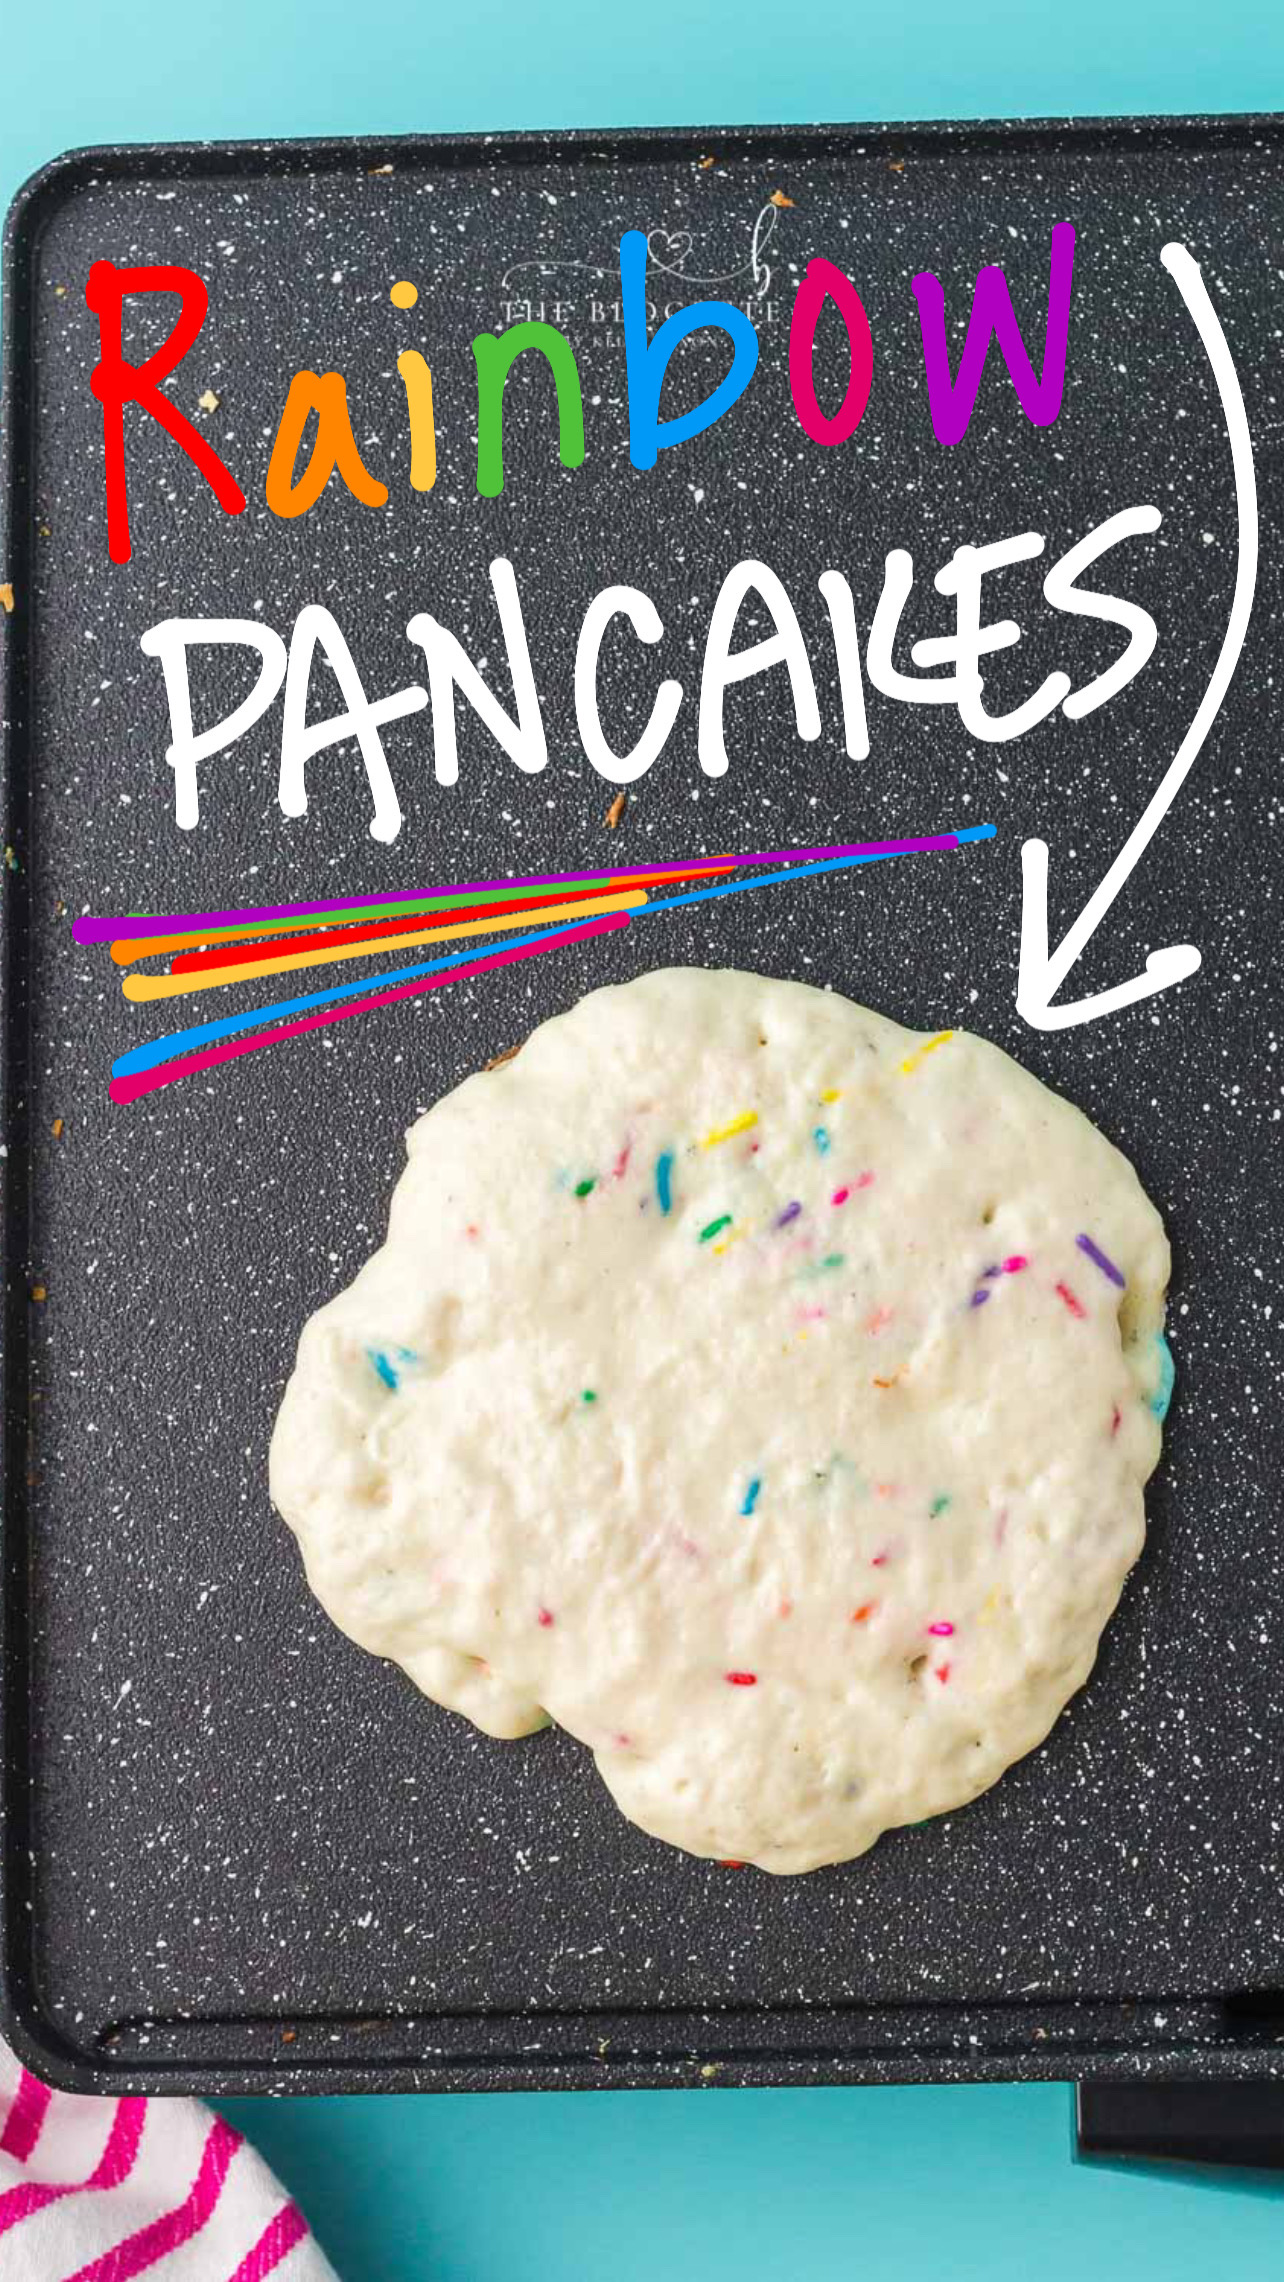 These fluffy Rainbow Pancakes are great for a special birthday or holiday breakfast! Kids LOVE the colorful sprinkles inside.